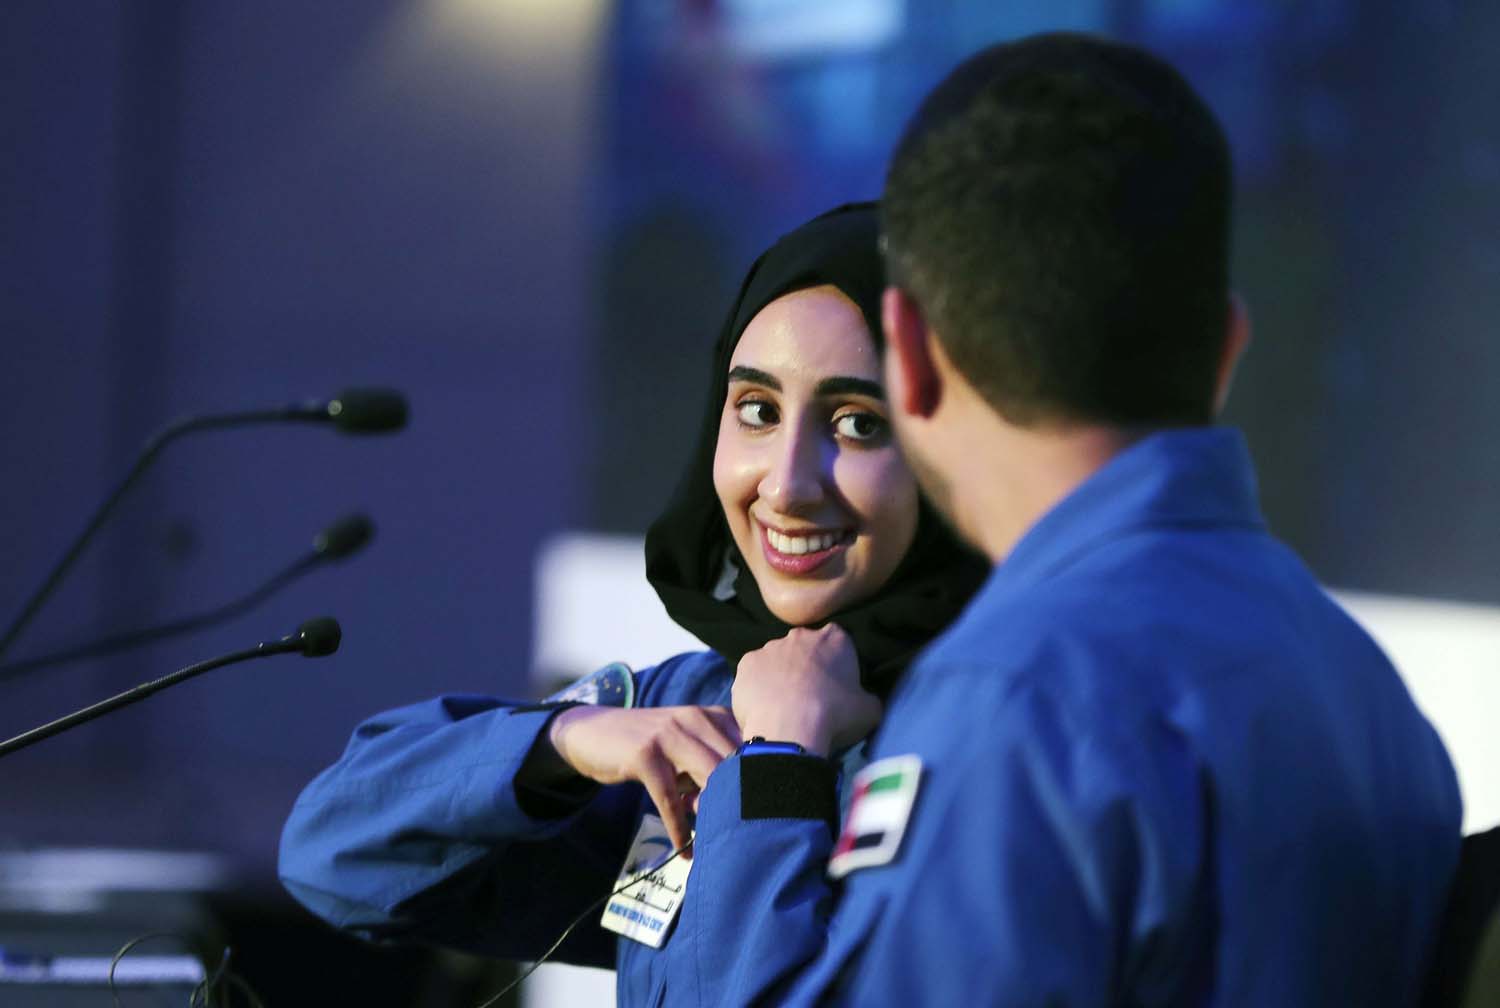 Matrooshi and her fellow countryman, Mohammad al-Mulla will train at NASA's Johnson Space Center